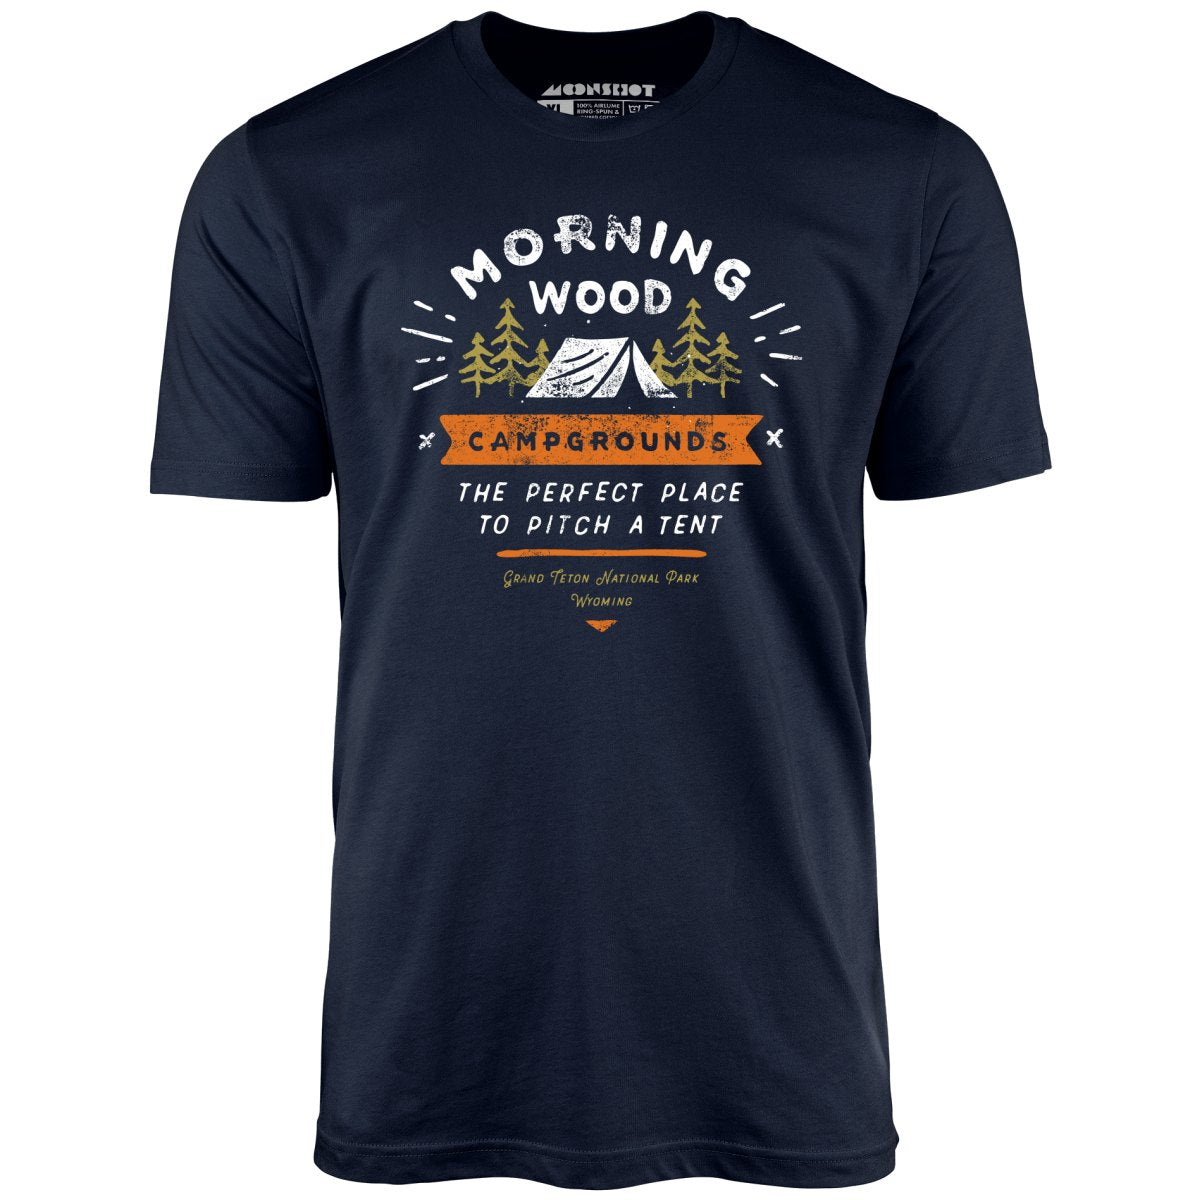 Morning Wood Campgrounds - Unisex T-Shirt